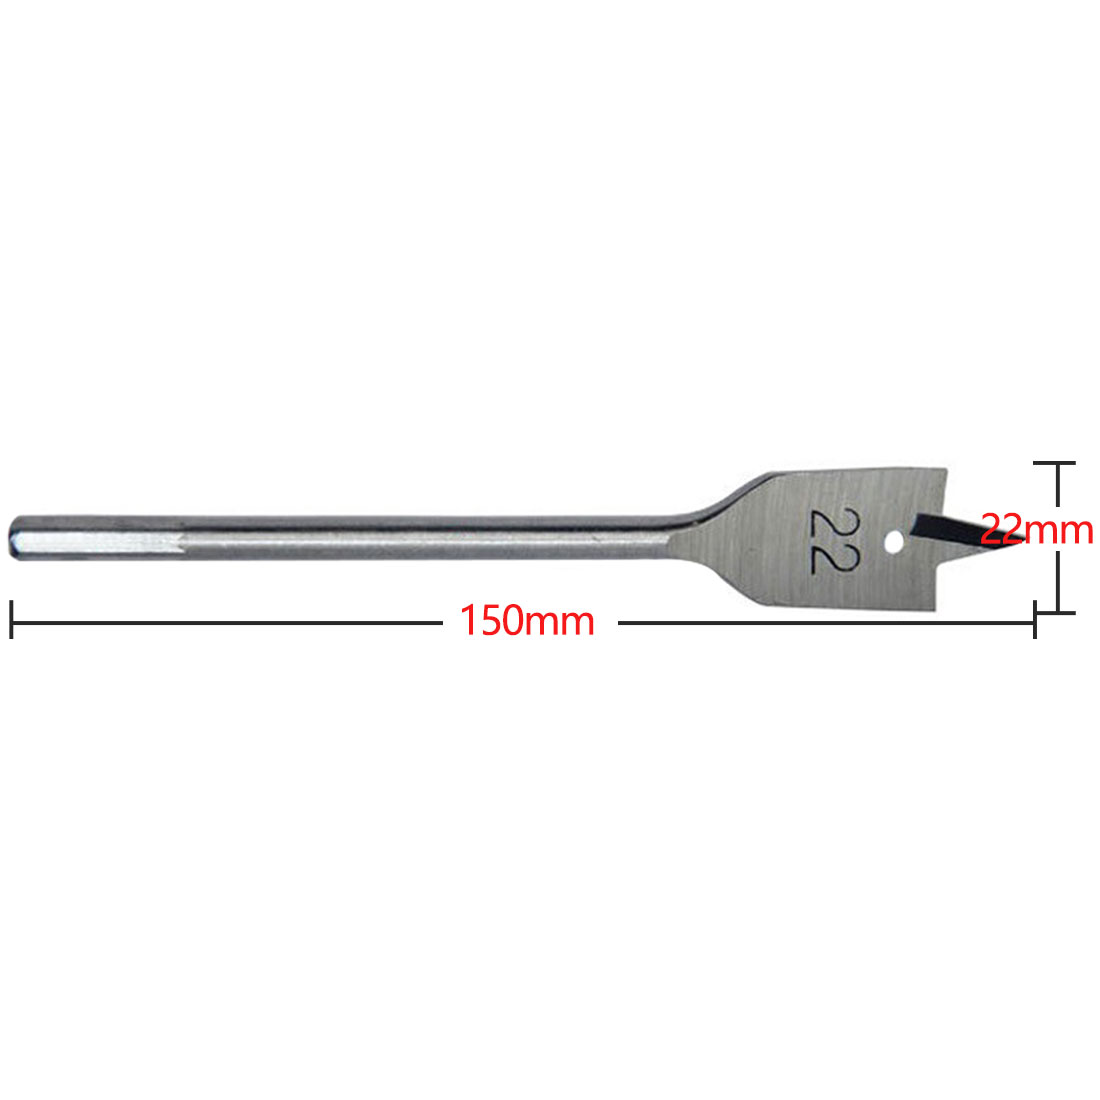 Long High-carbon Steel Wood Flat Drill Set 6-30mm Flat Drill Woodworking Spade Drill Bits Durable Woodworking Tool Sets